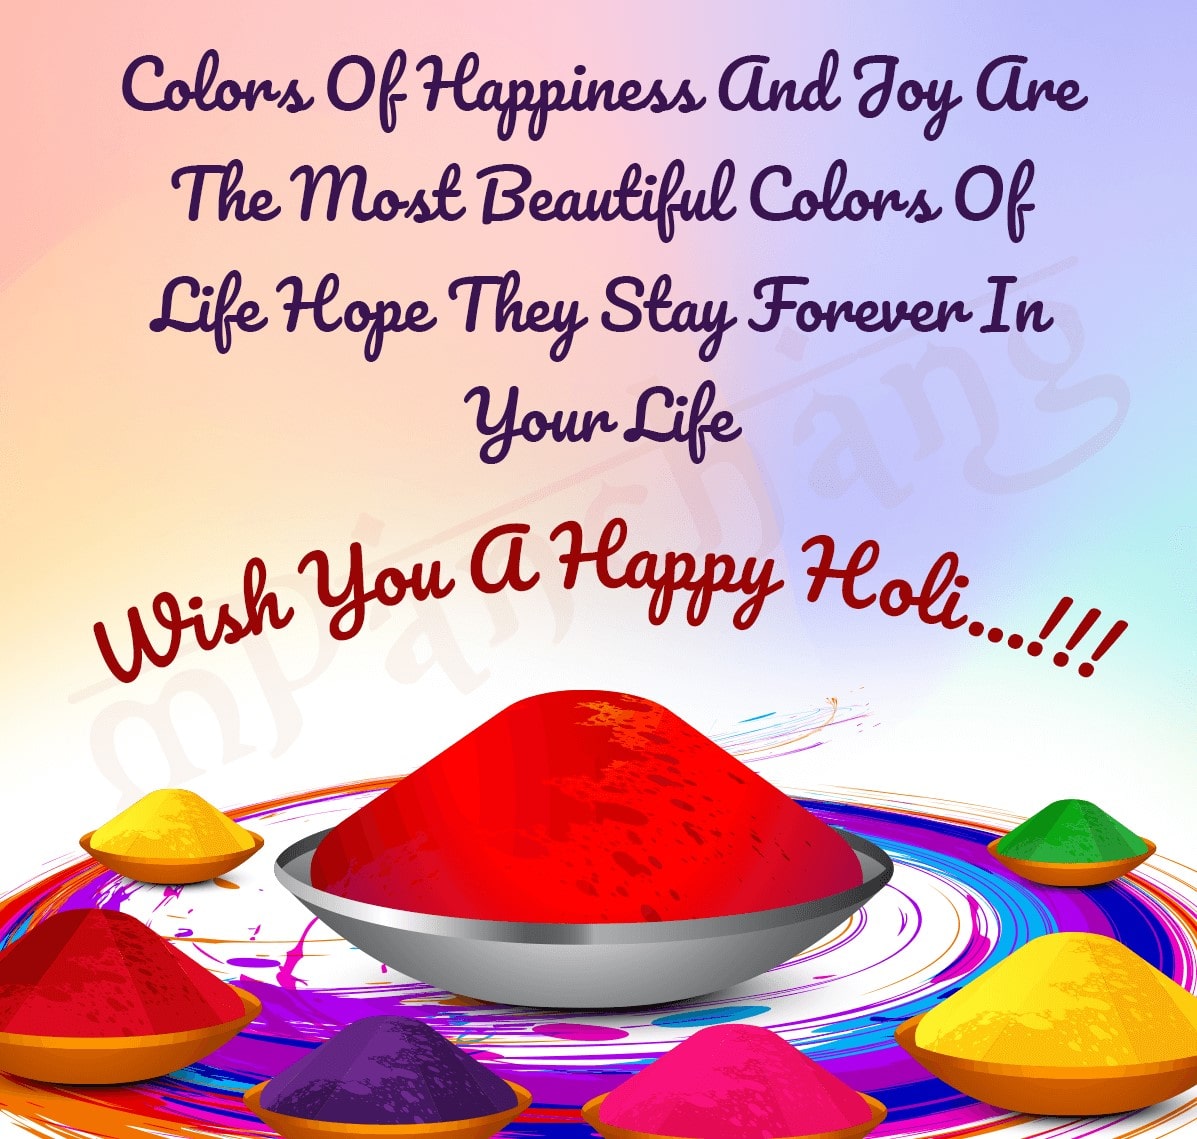 holi wishes in english